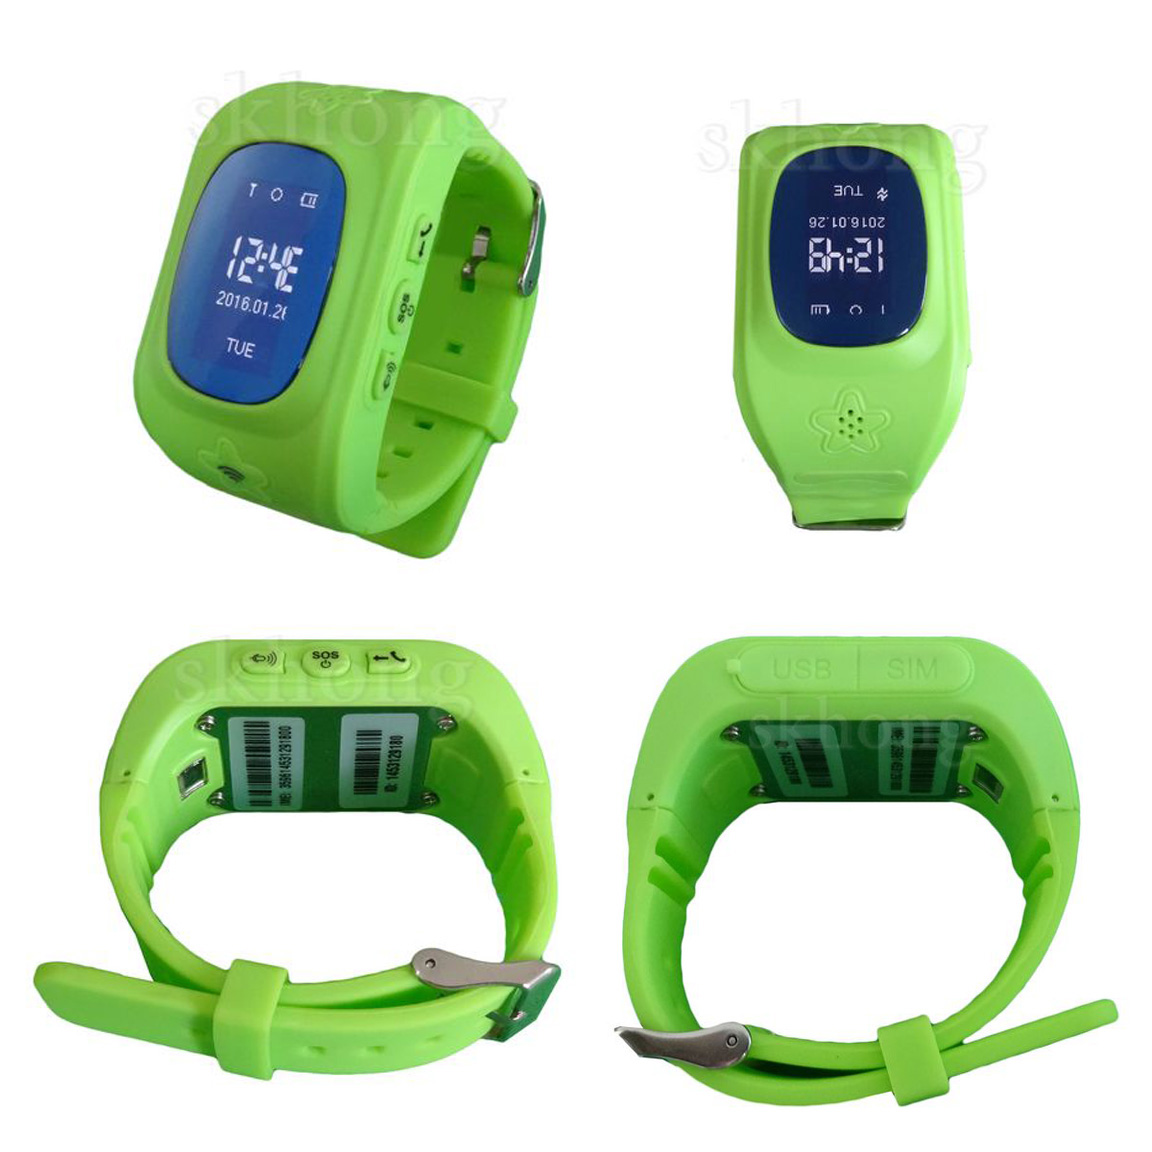 Smart Watch, Y1 Smart Watch, New Y1 Smart Watch manufacturer / supplier in China, offering New Y1 Smart Watch with Micro SIM/TF Card Wearable Devices, Rt-Mc54 3 in 1 Nylon Braided 90 Degree Right Angle USB Fast Charging Cable, Rt-Mc54 Cheap Price 3in1 Nylon Braided USB Micro Type C Lightning Cable and so on.